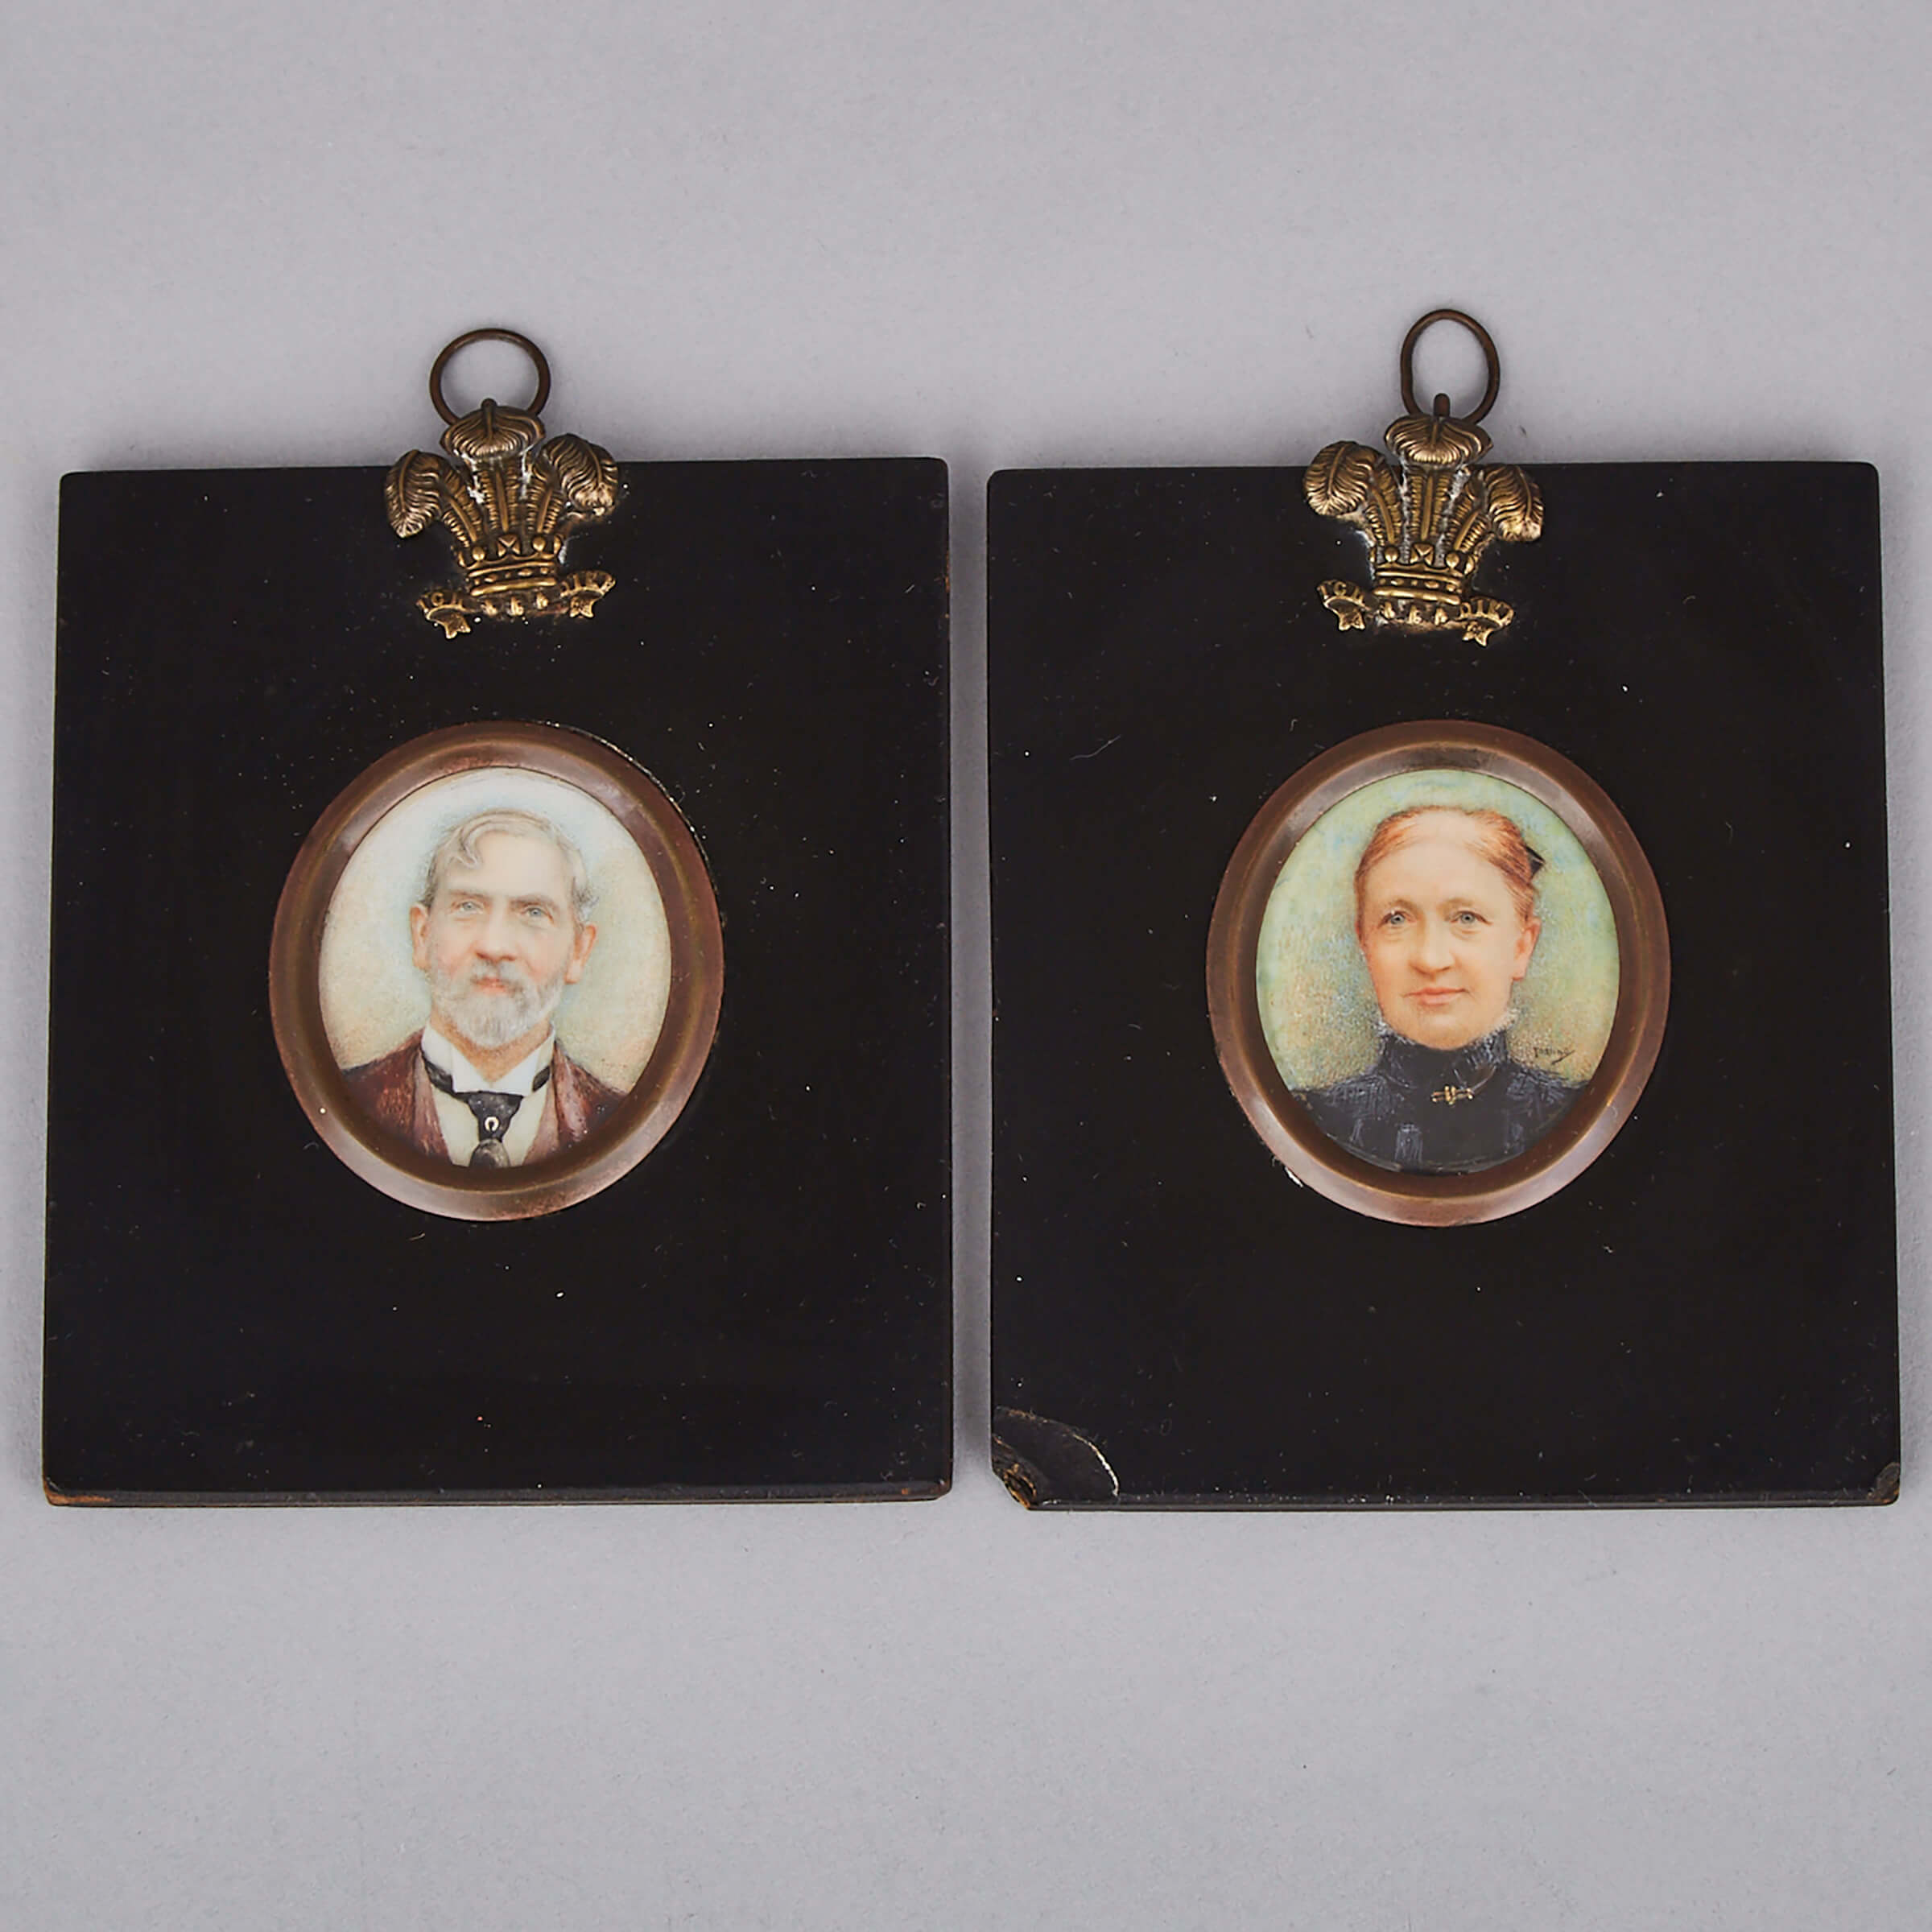 Pair of British School Portrait Miniatures of a Gentleman and a Gentlewoman, mid 19th century